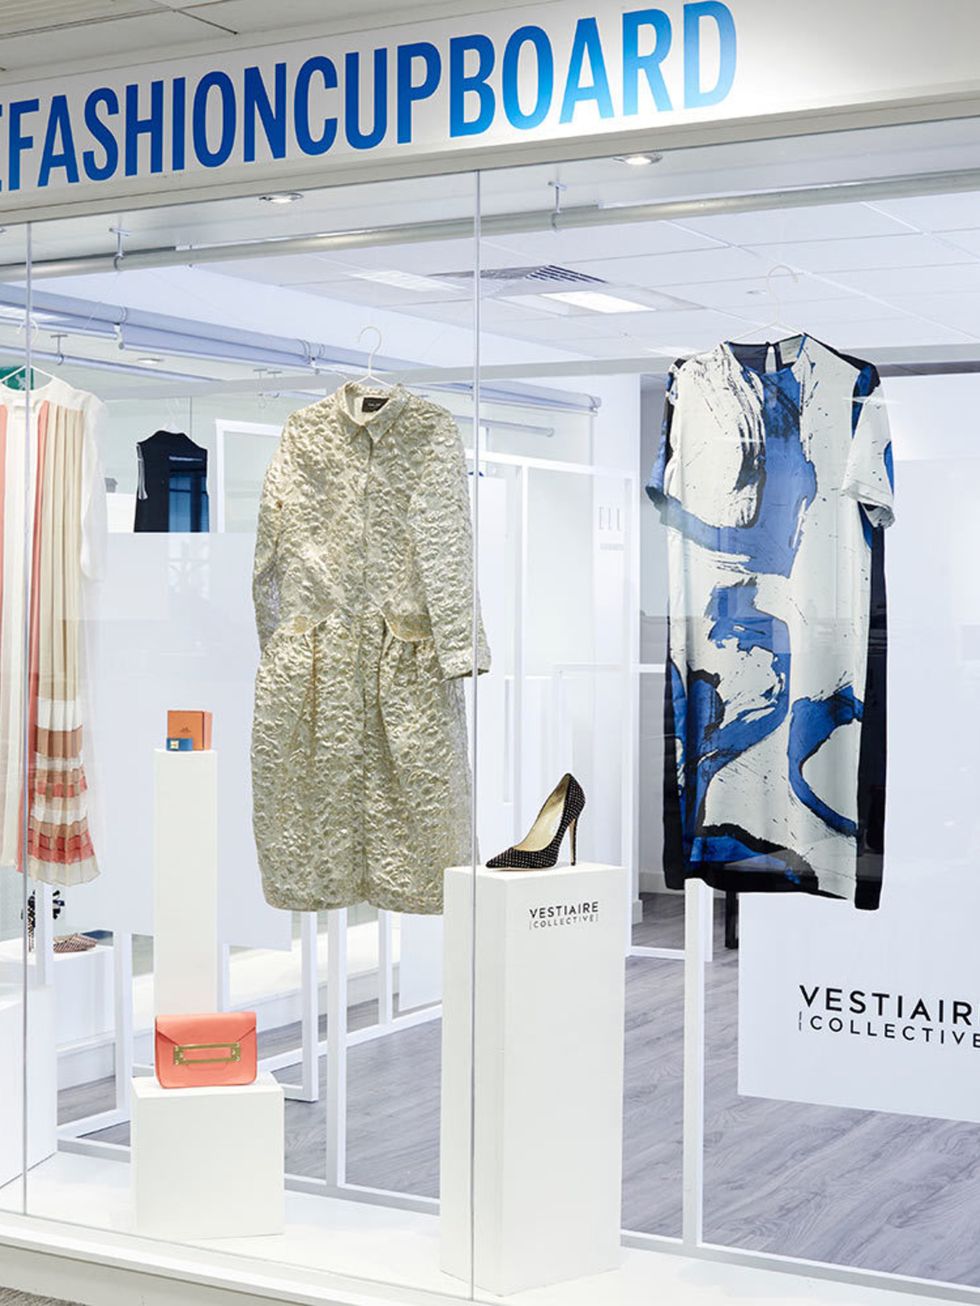 How to Scrape Vestiaire Collective for Fashion Product Data